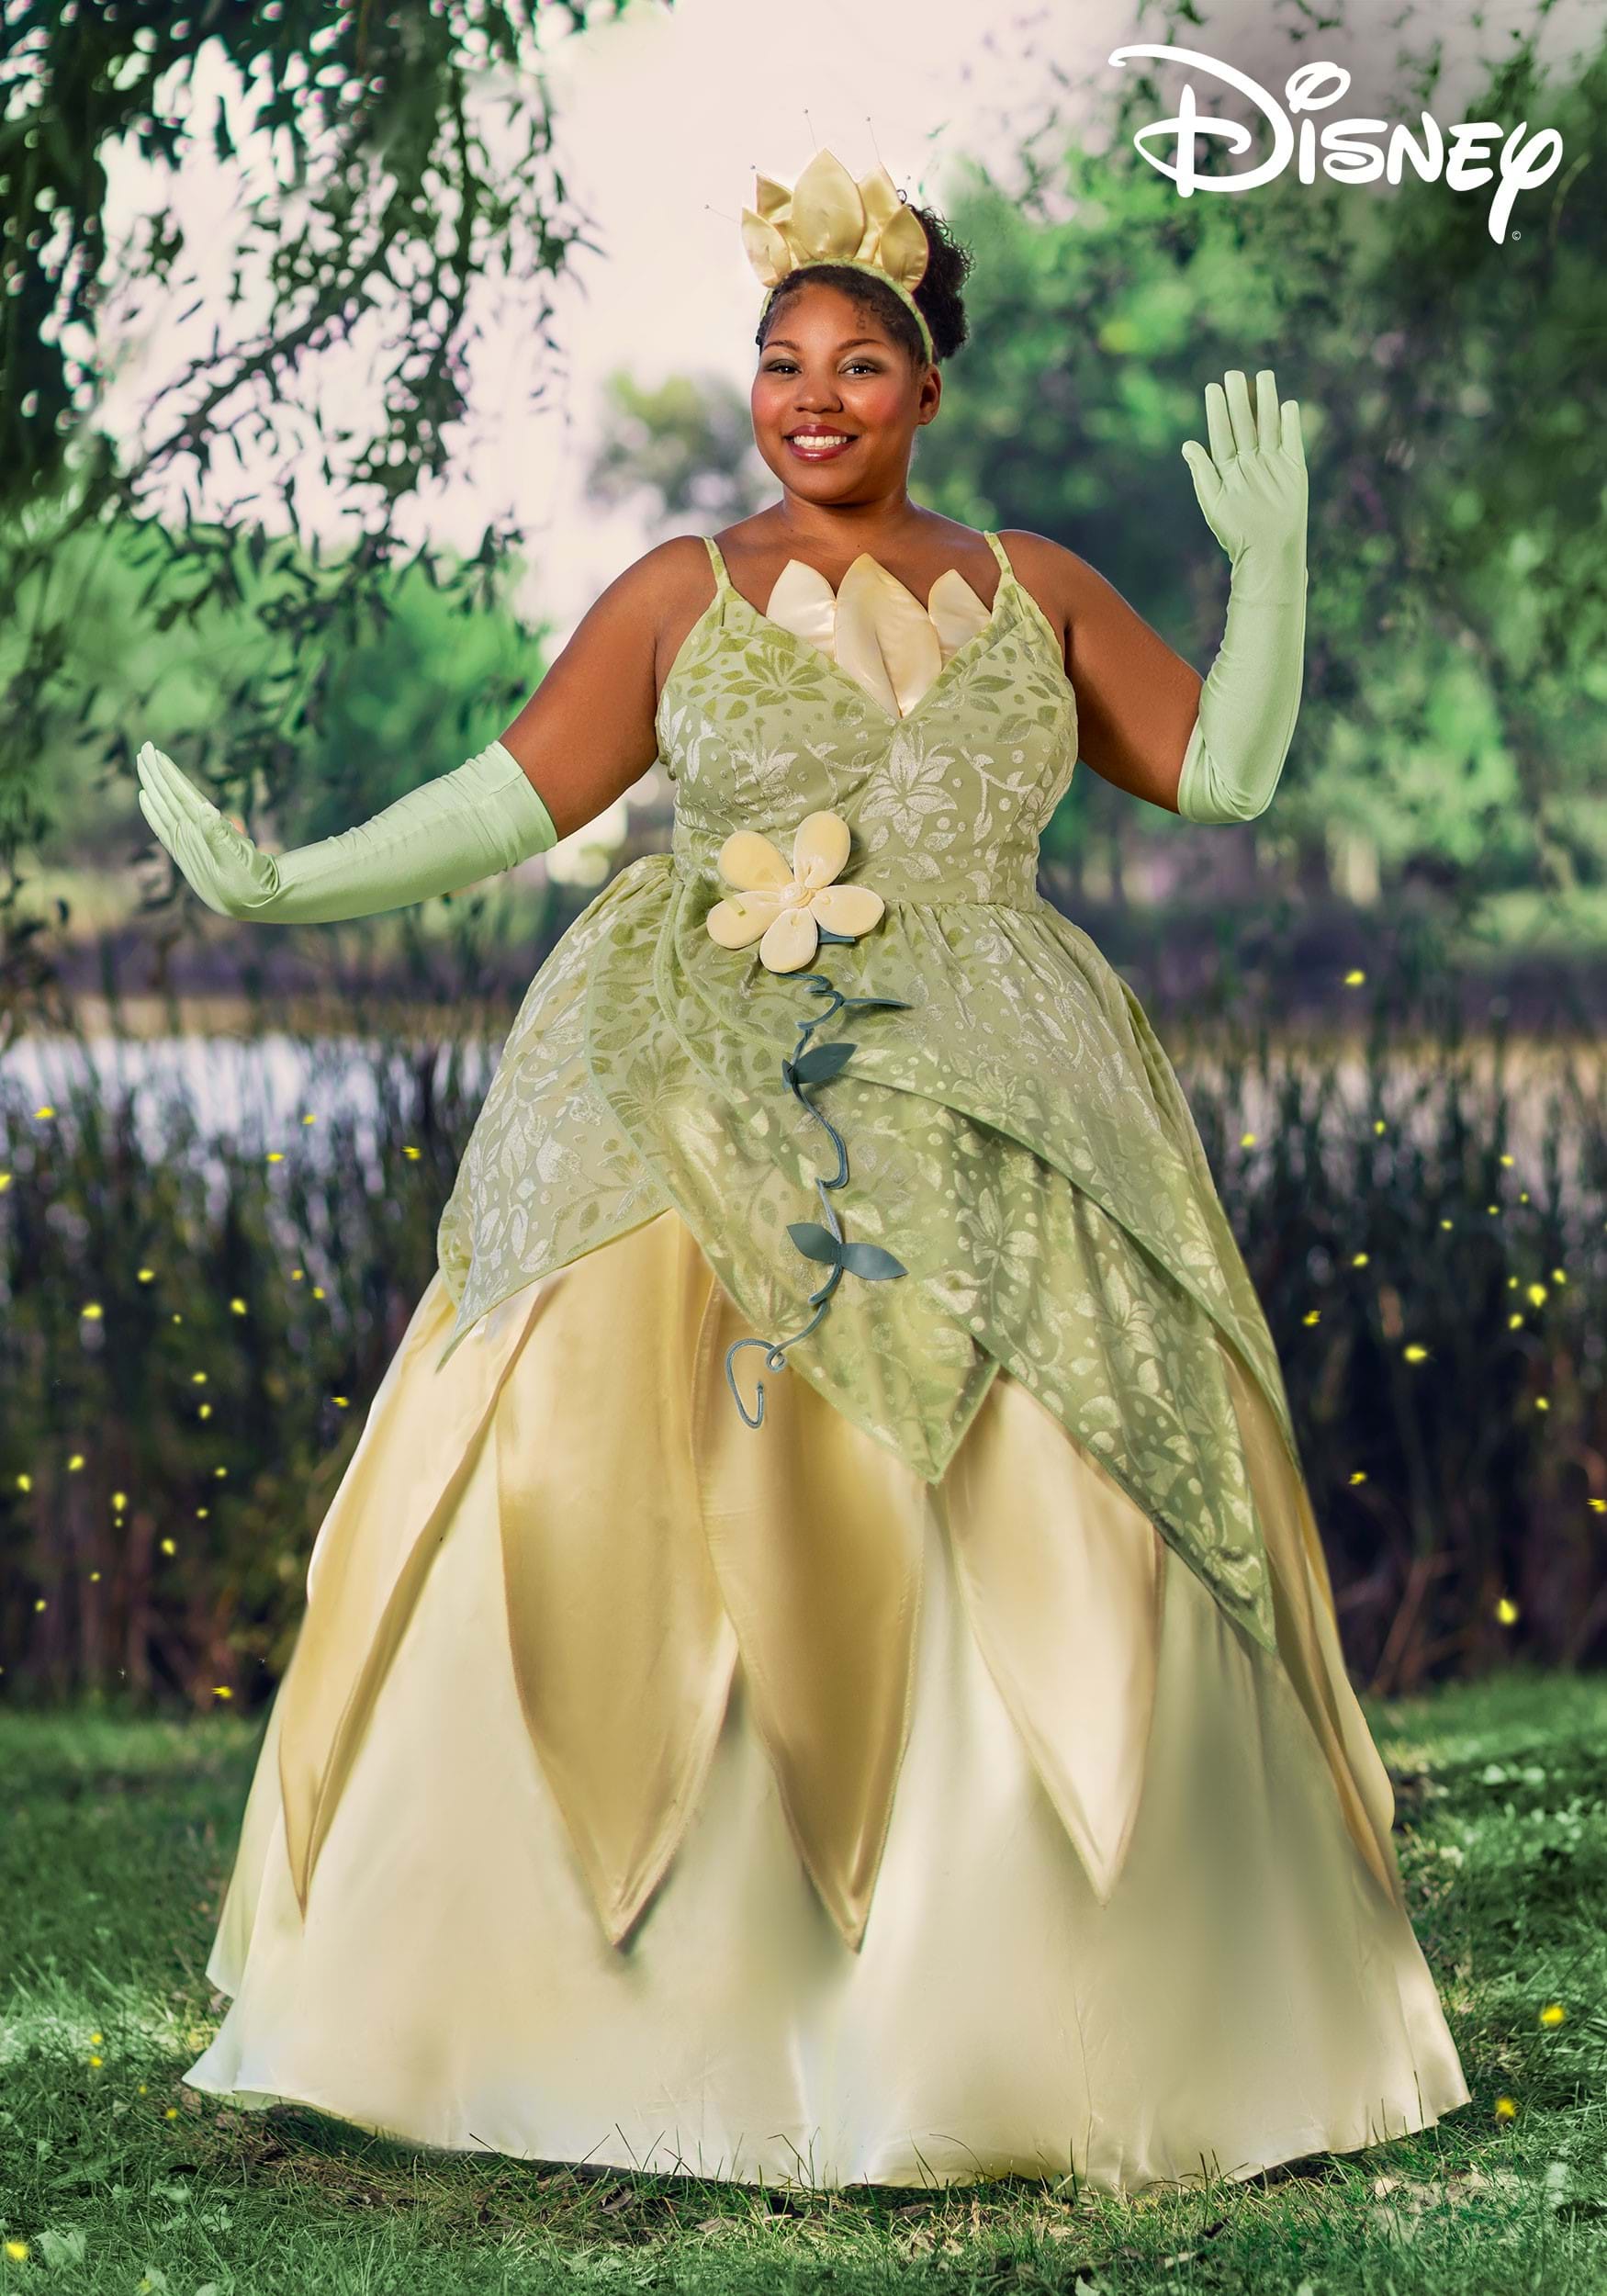 Women's Plus Size Deluxe Disney Princess and the Frog Tiana Costume